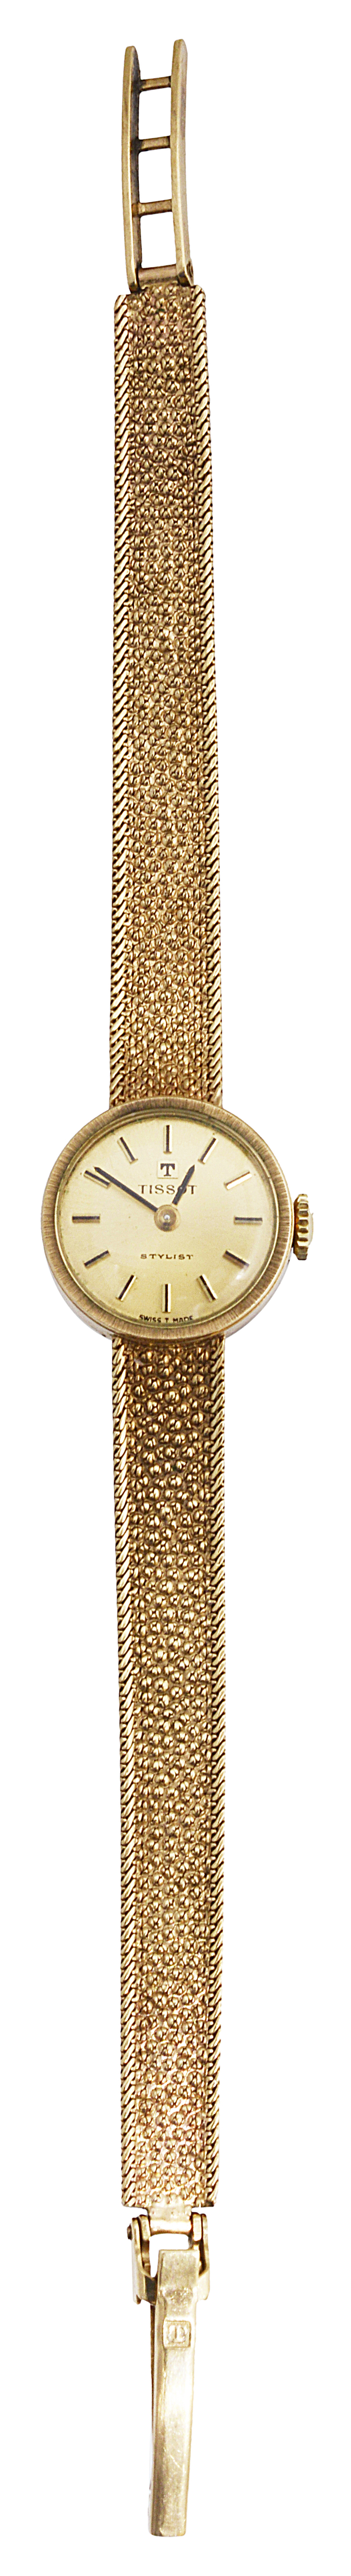 A 9ct gold lady's wristwatch by Tissot - Image 2 of 2